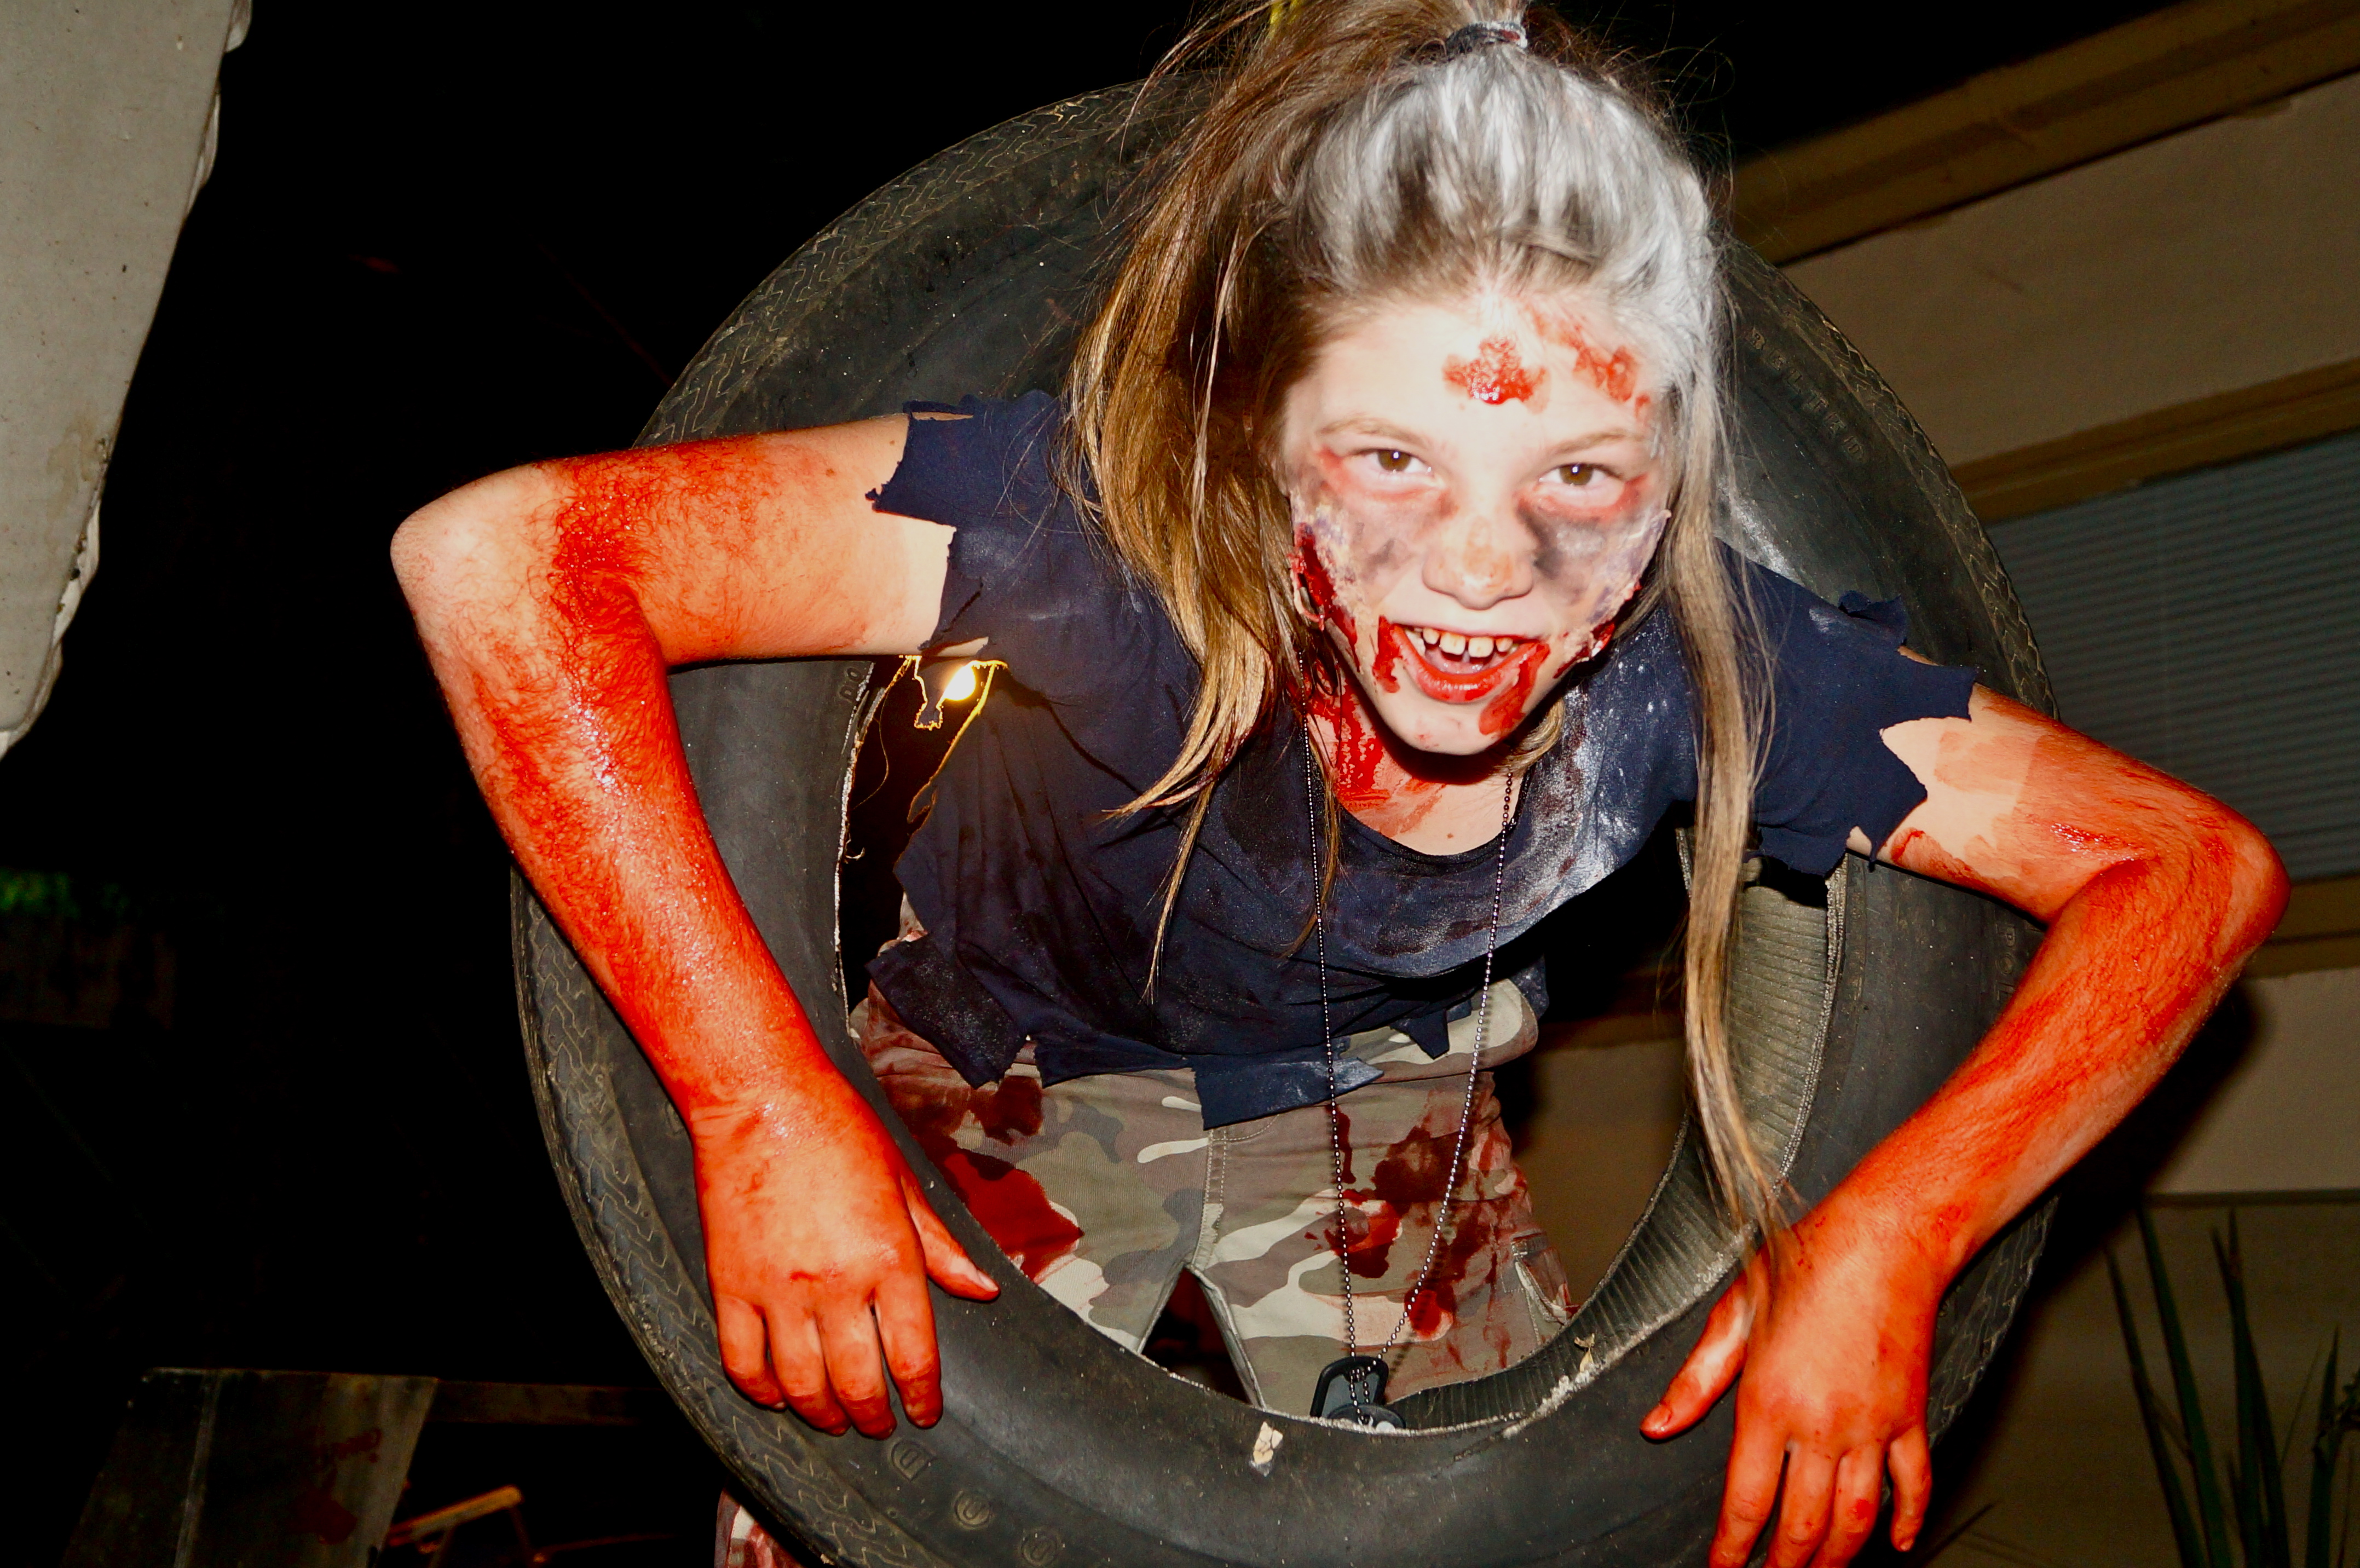 Call of the Dead III. Kylie Burkholder as Lead Zombie